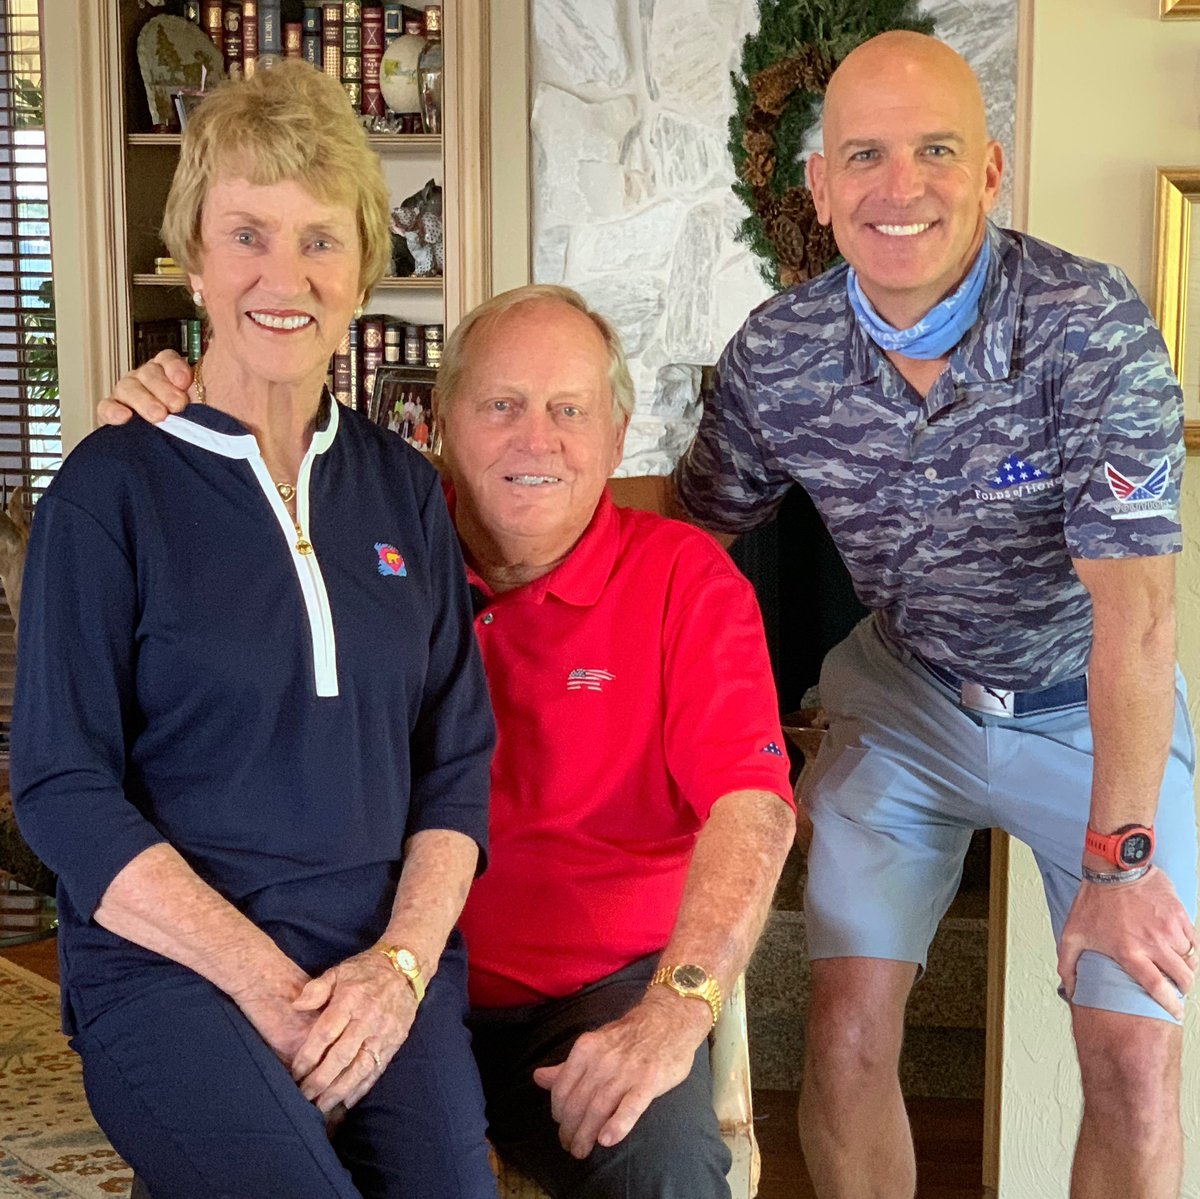 So humbling to spend the day with Mr and Mrs Nicklaus. We are t minus 67 days from opening @AmericanDunes together. 

@FoldsofHonor @jacknicklaus #AmericanDunes #foldsofhonor #Volition #golf #pga #golfcourse #michigangolf